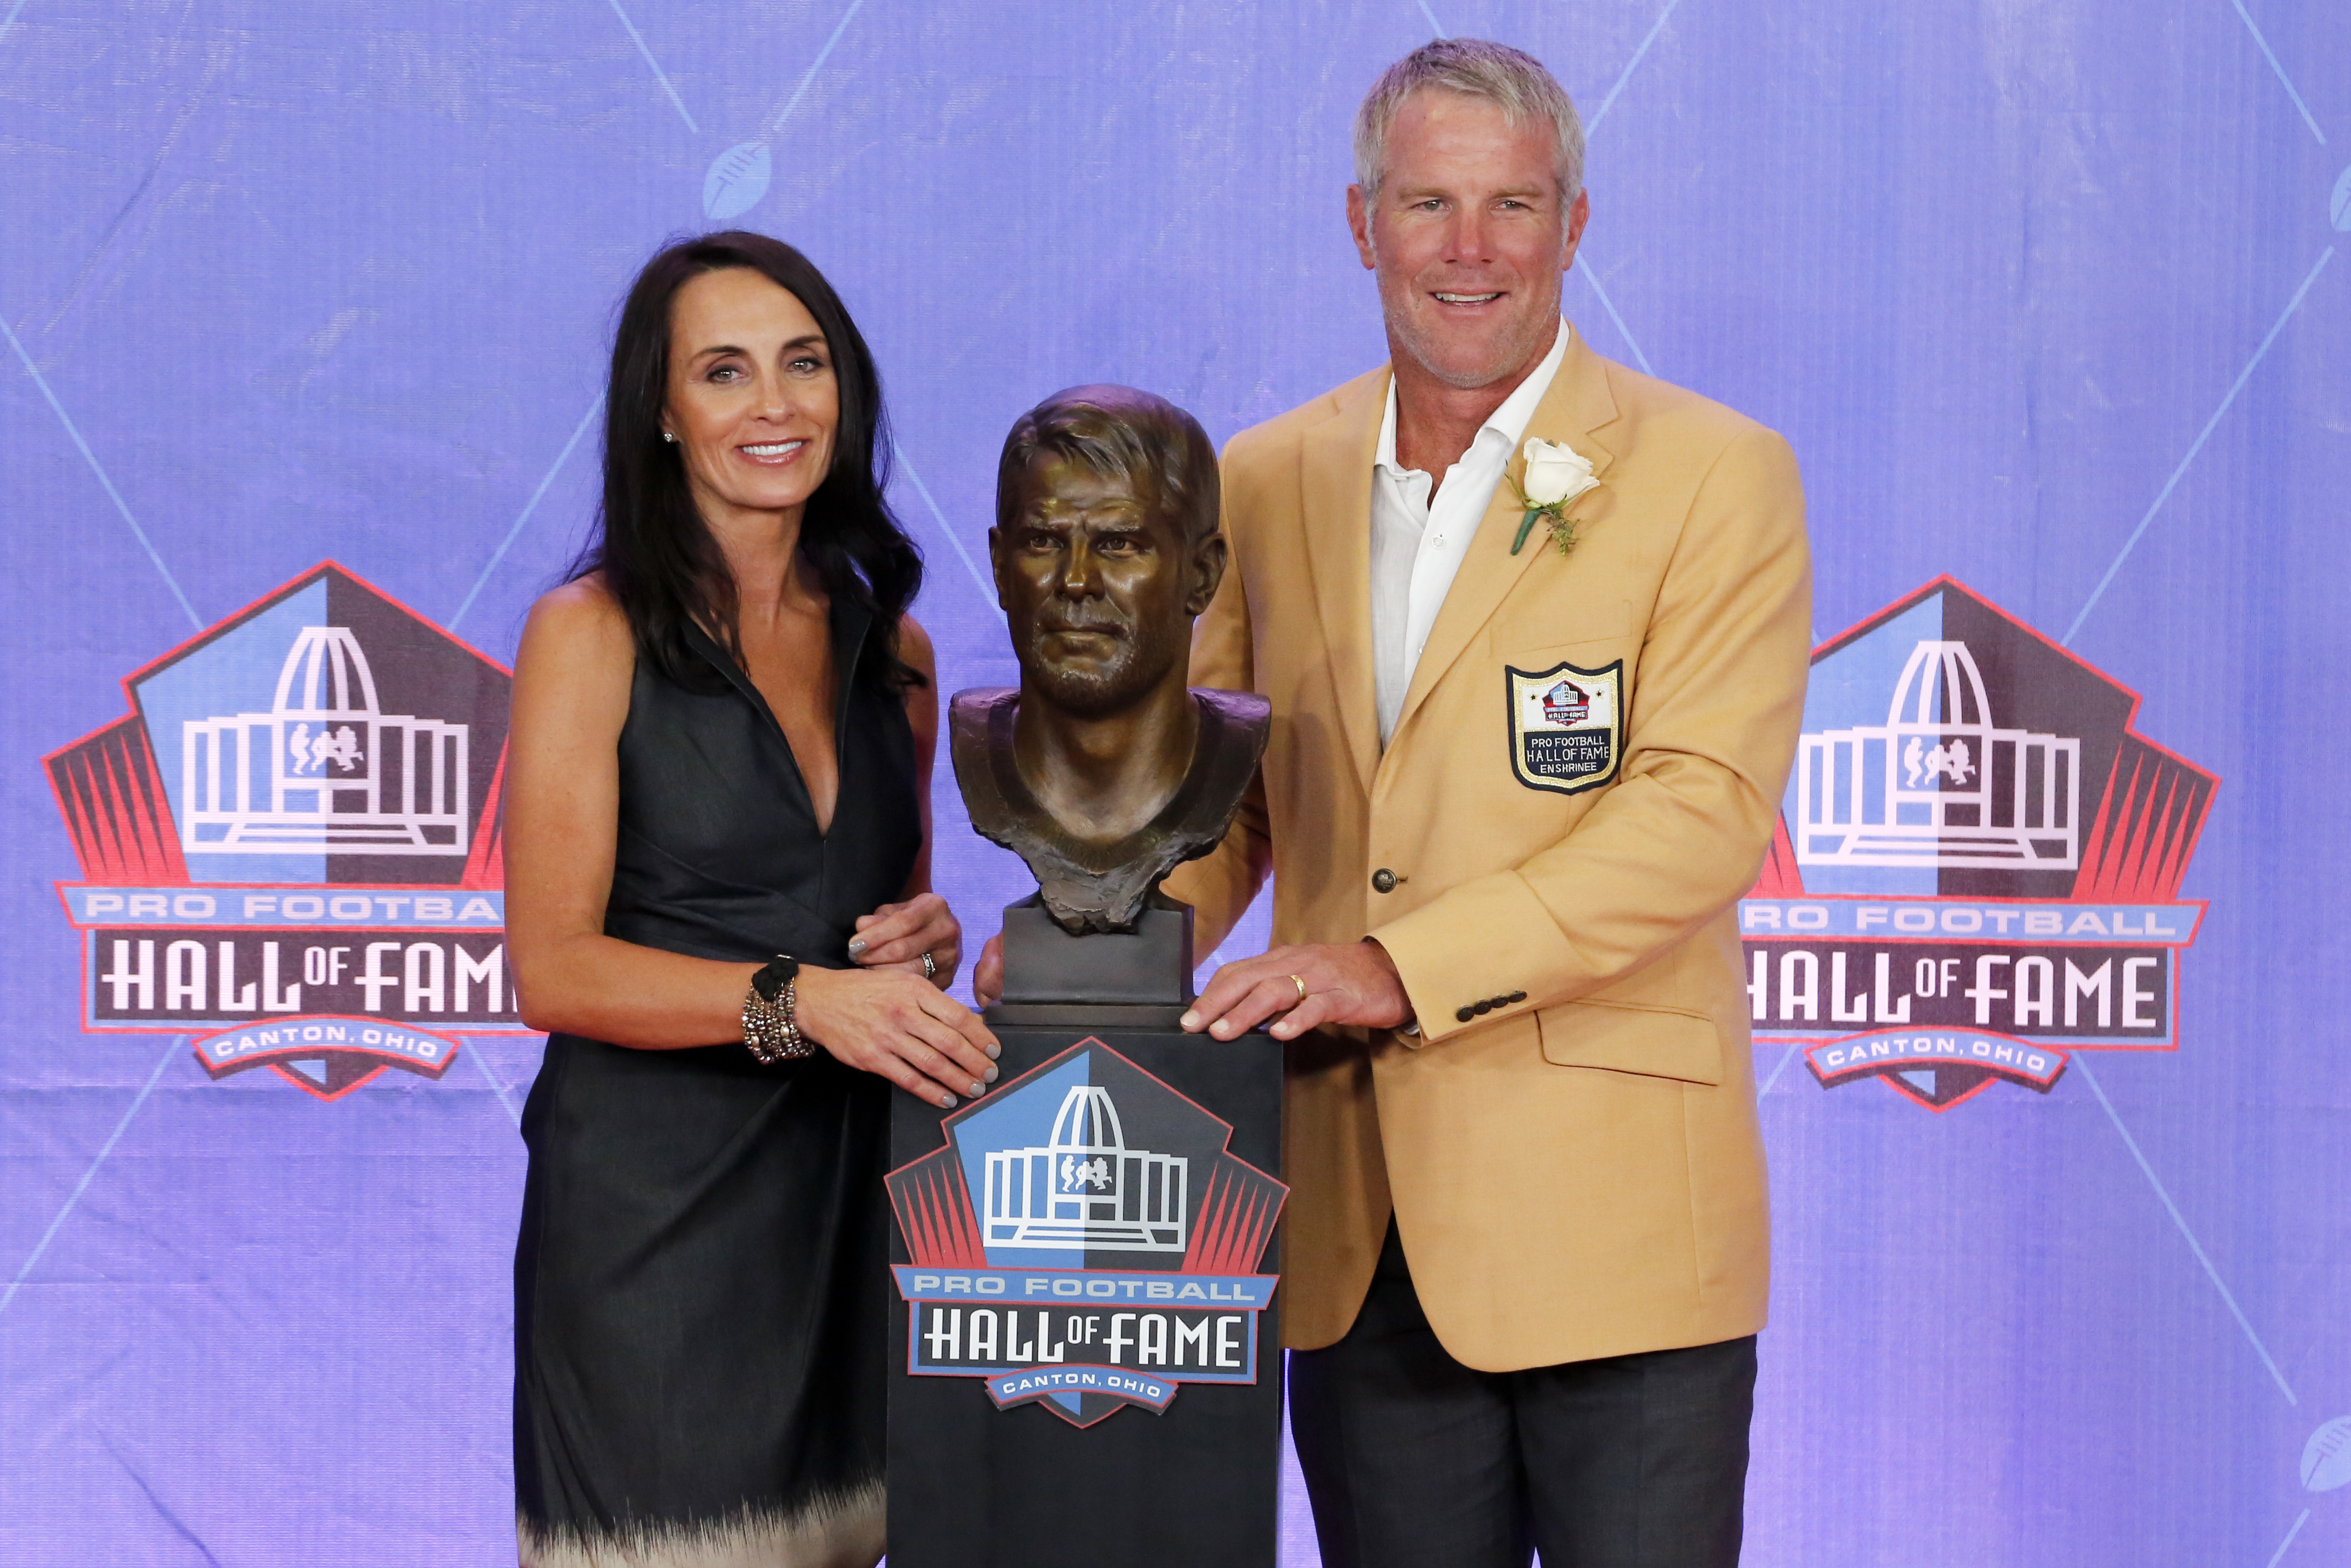 Brett Favre's wife doesn't want to talk about it either